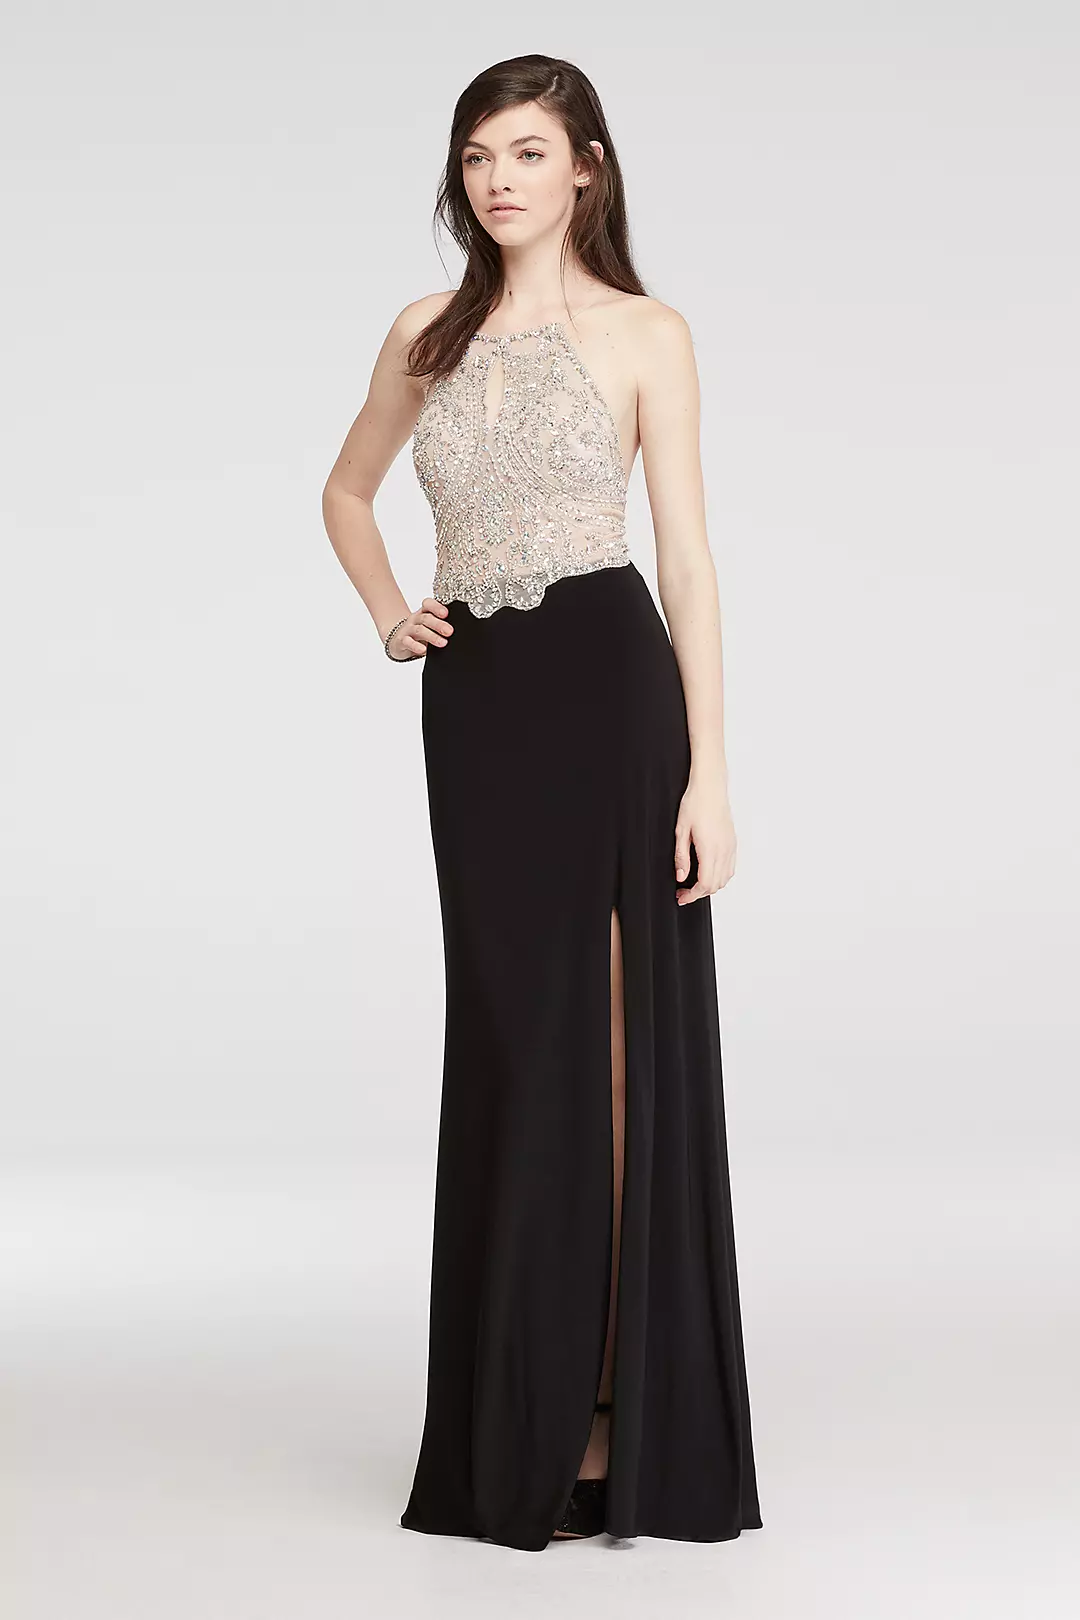 Halter Prom Dress with Beaded Illusion Bodice  Image